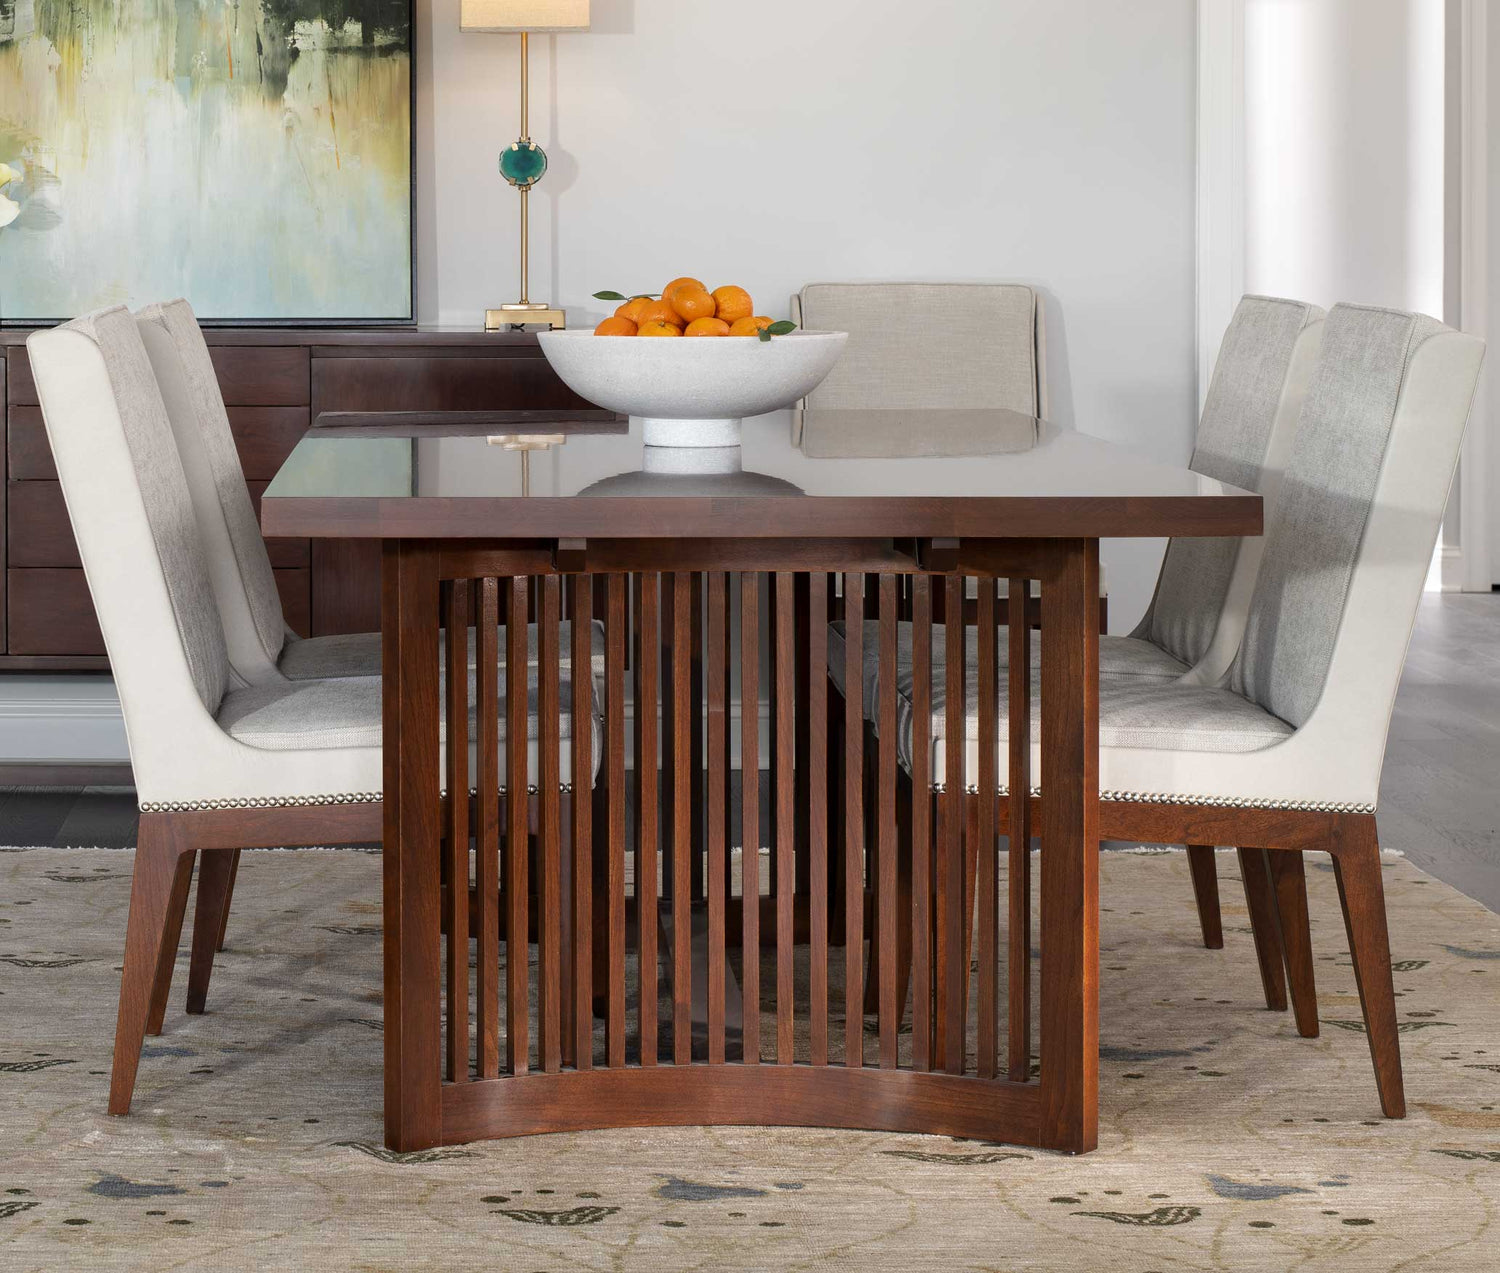 Lifestyle of Park Slope Trestle Dining Table with four Park Slope Shelter Chairs